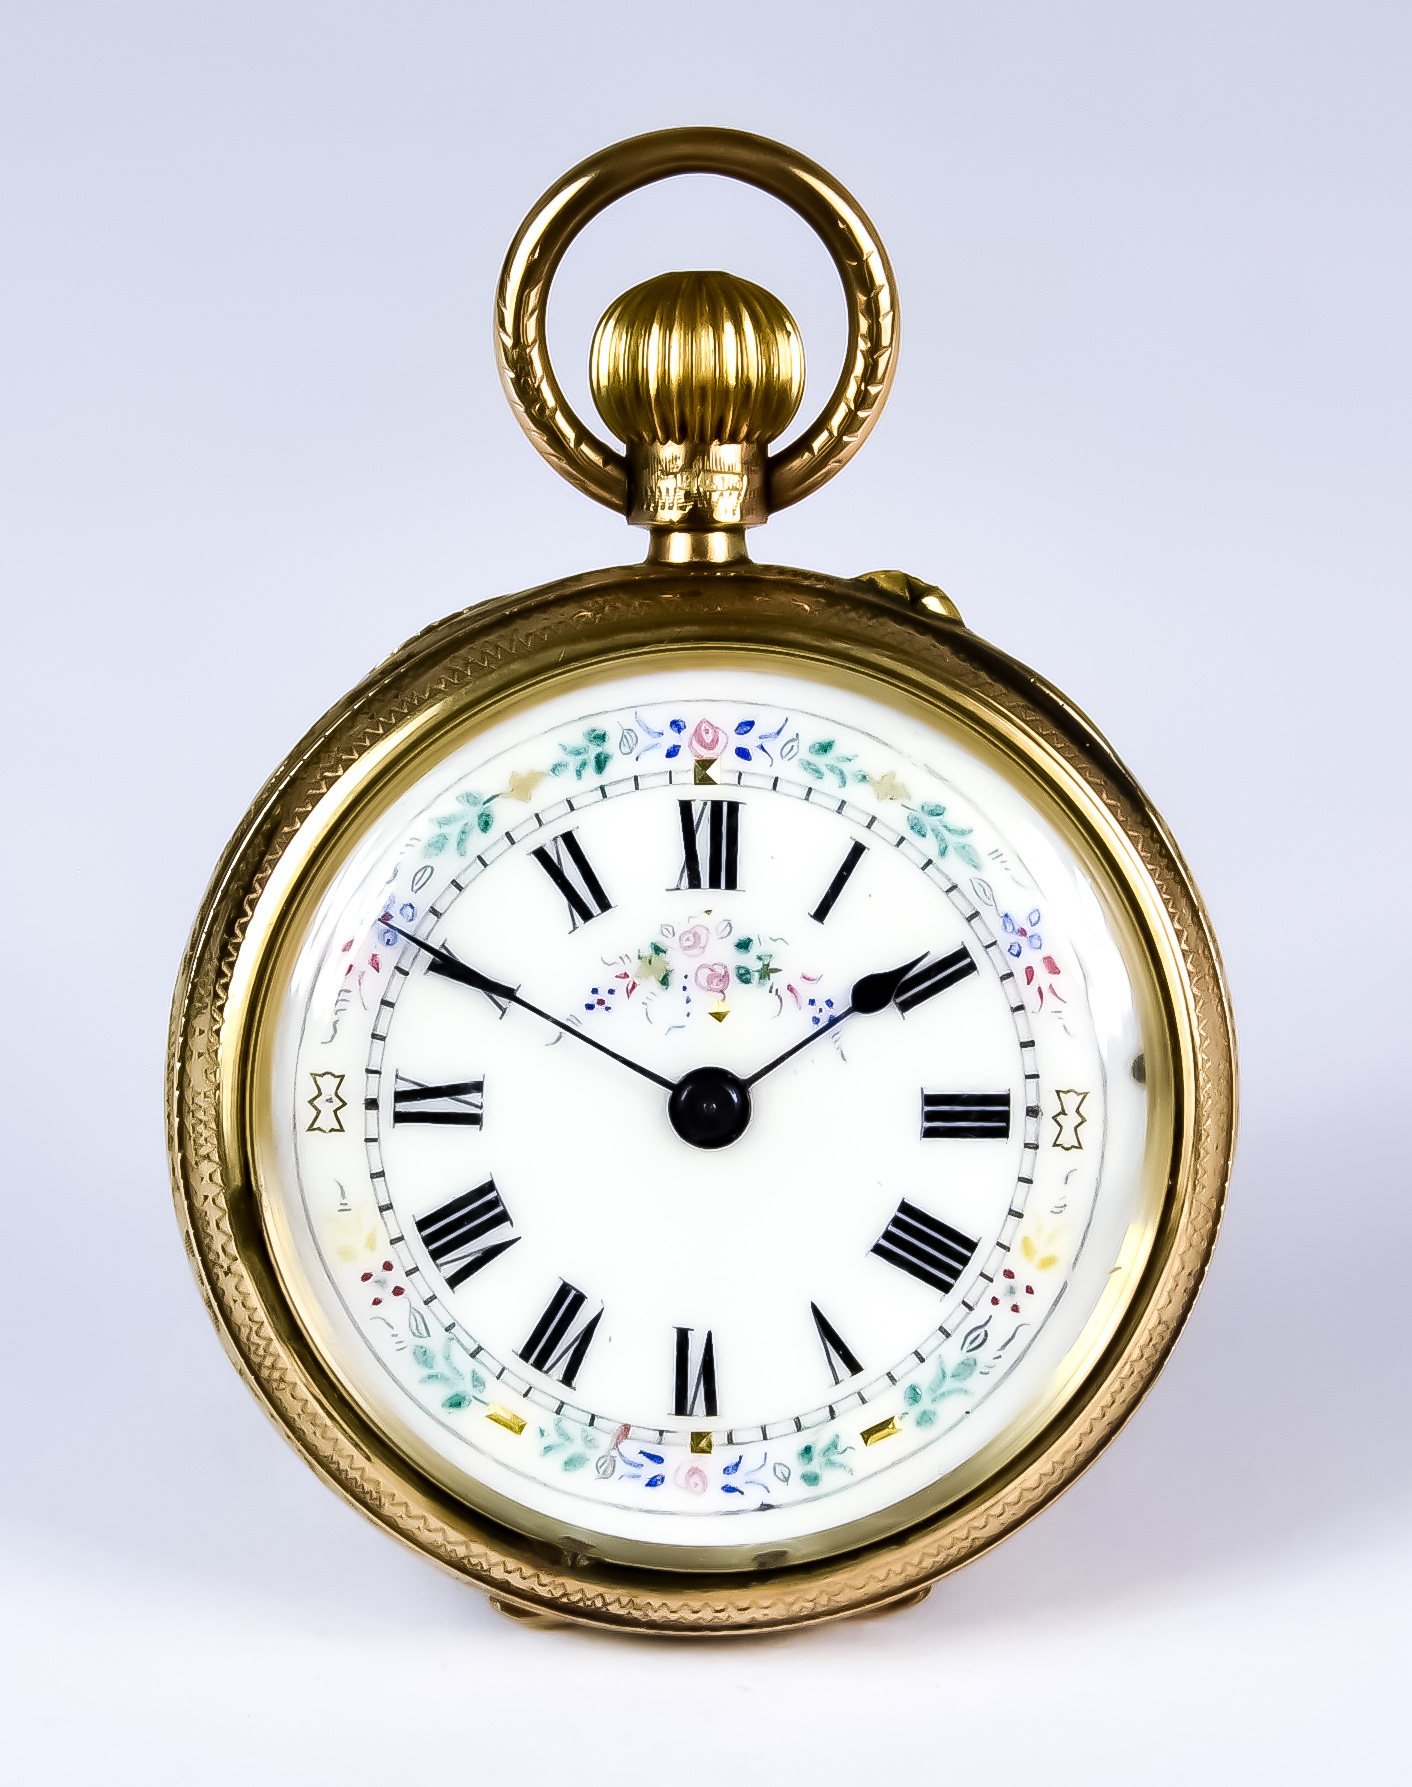 A Lady's 9ct Gold Fob Watch, Continental, 39mm diameter case, decorated with heart and foliate work,